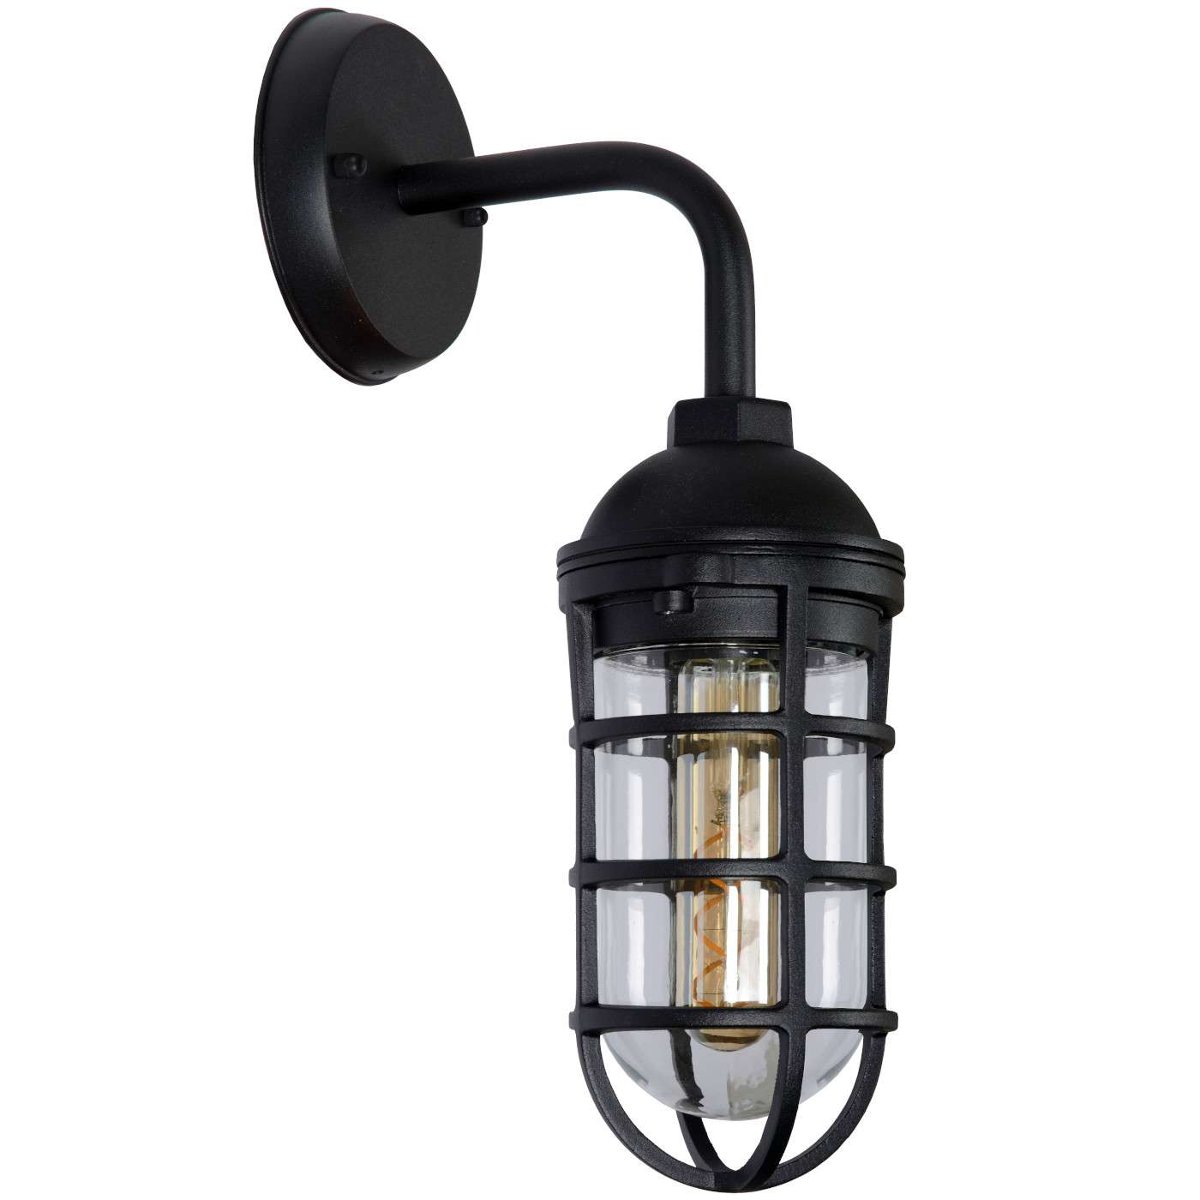 Lampa 18576 Tend.Prvacy 2015 